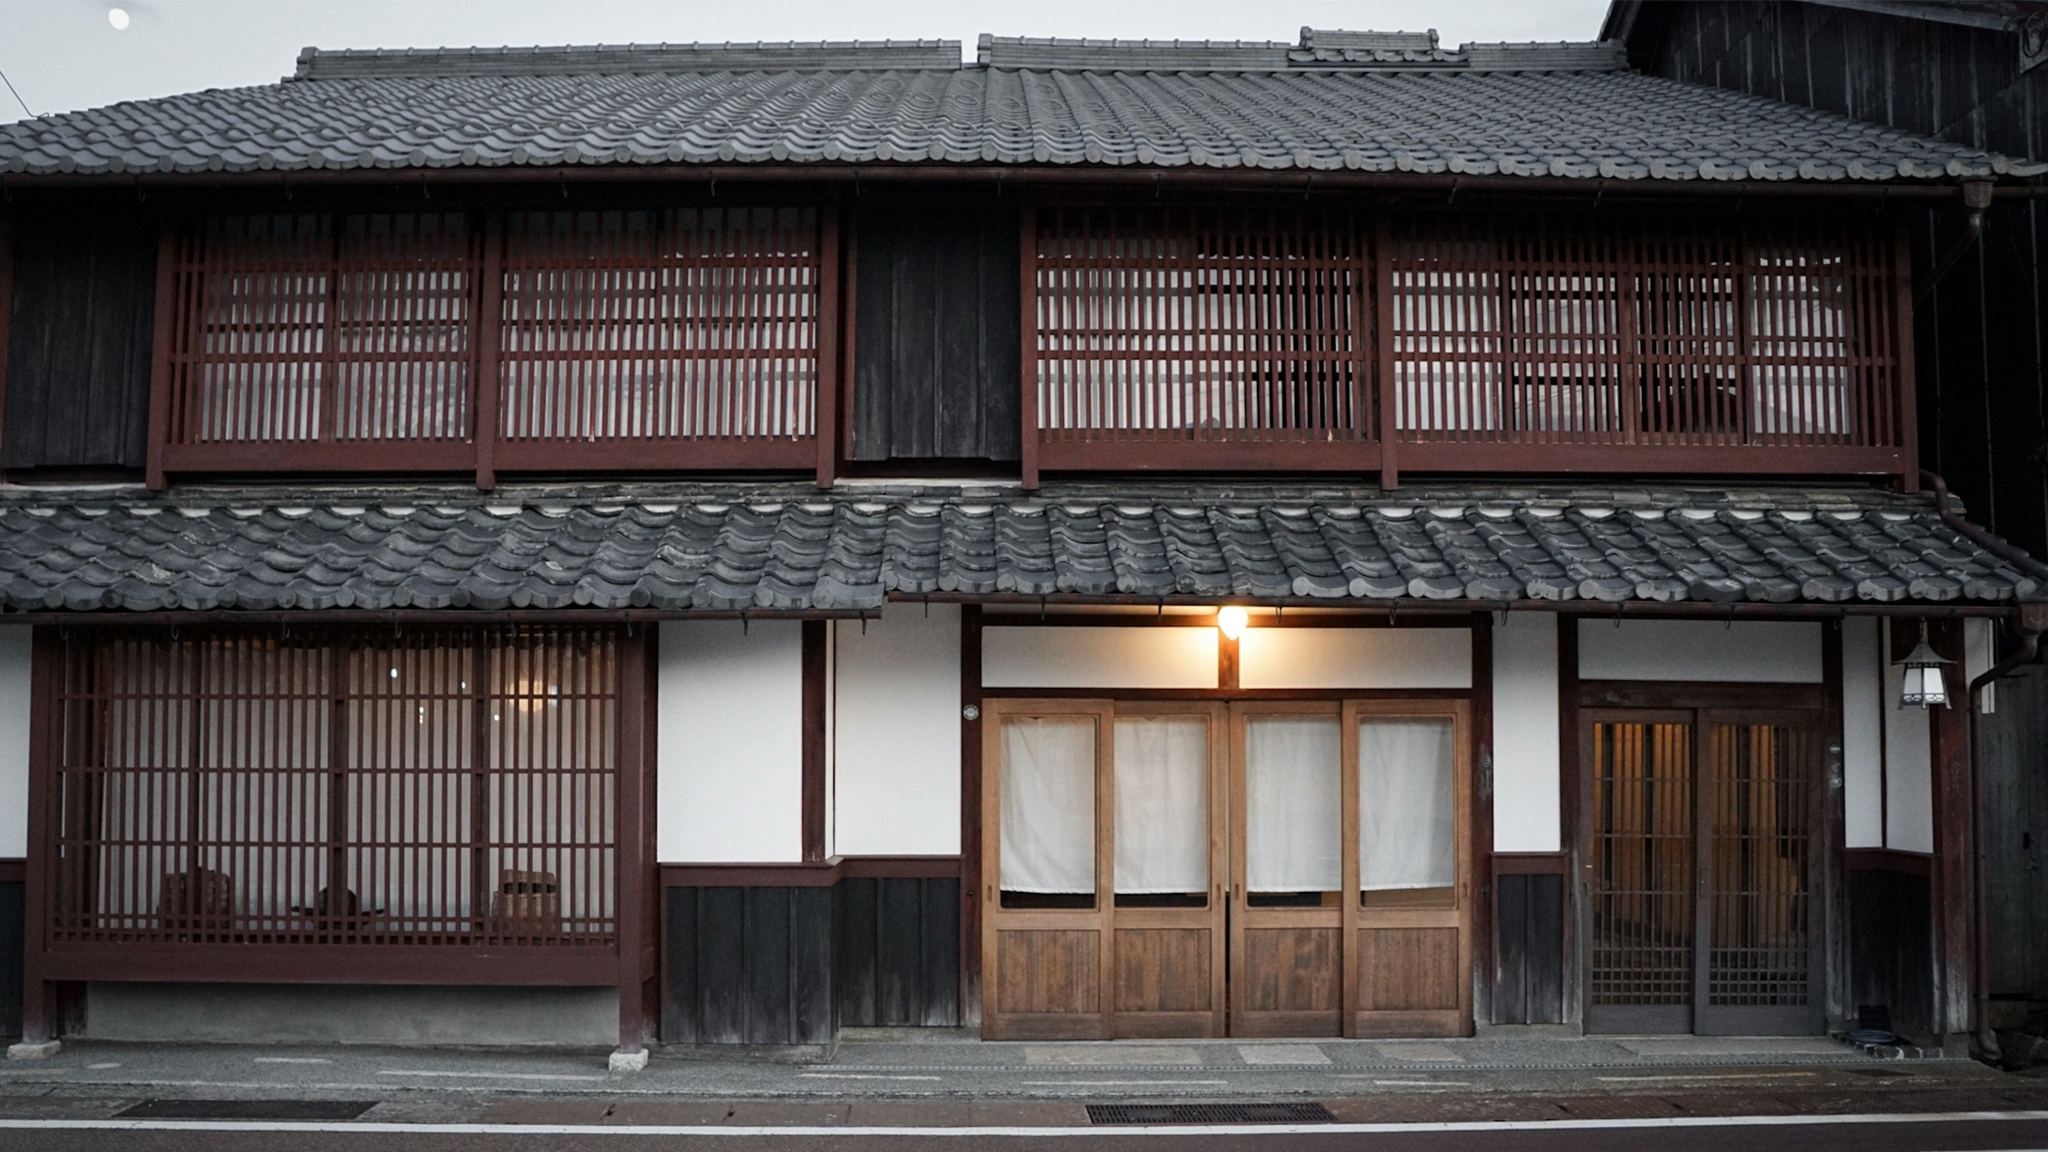 The traditional latticed wooden exterior of Fukudaya, painted in carmine red against black and white